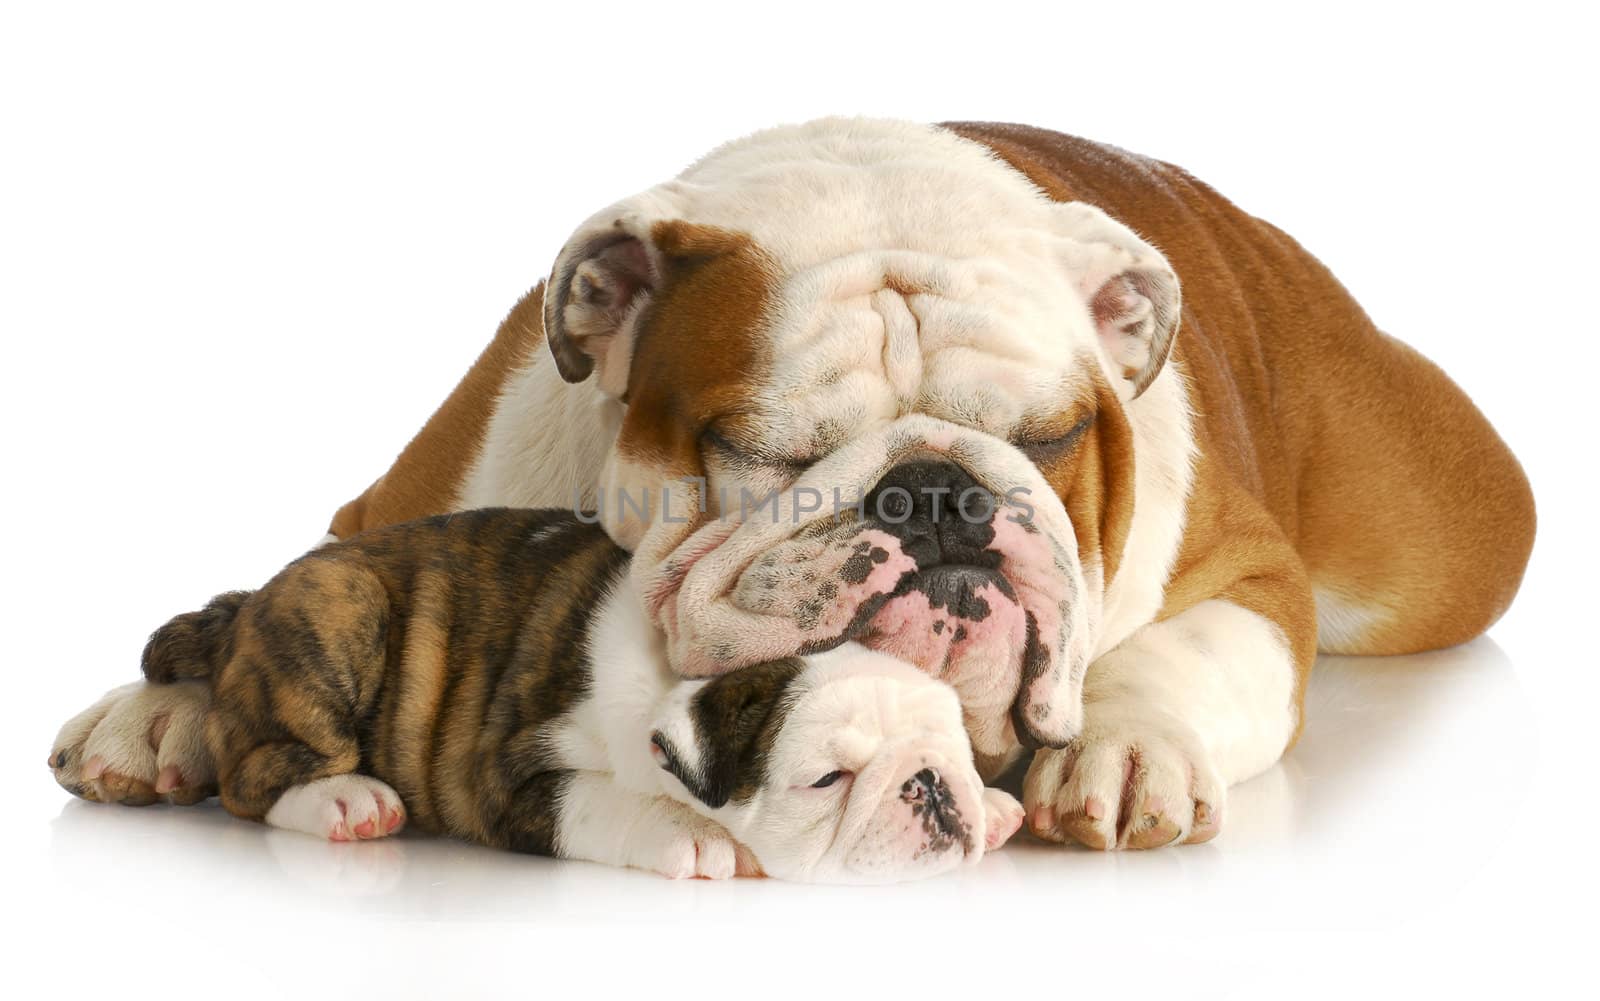 bulldog father and daughter resting together on white background